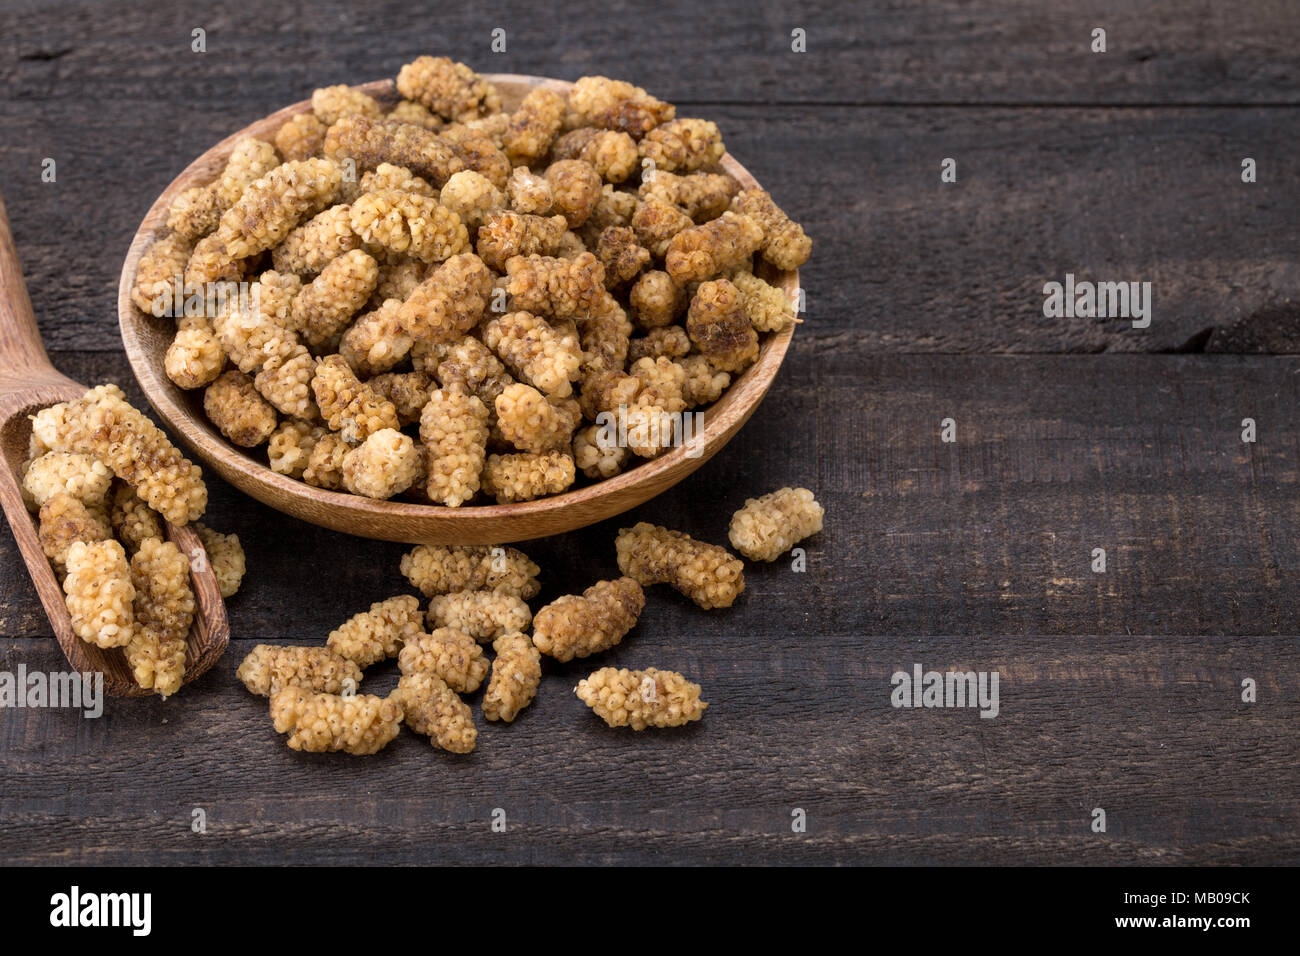 Close Up Shot Of Dried White Mulberries Fruits In A Wooden Bowl And Spoon On Dark Wooden Background And Empty Space For Typing Text Stock Photo